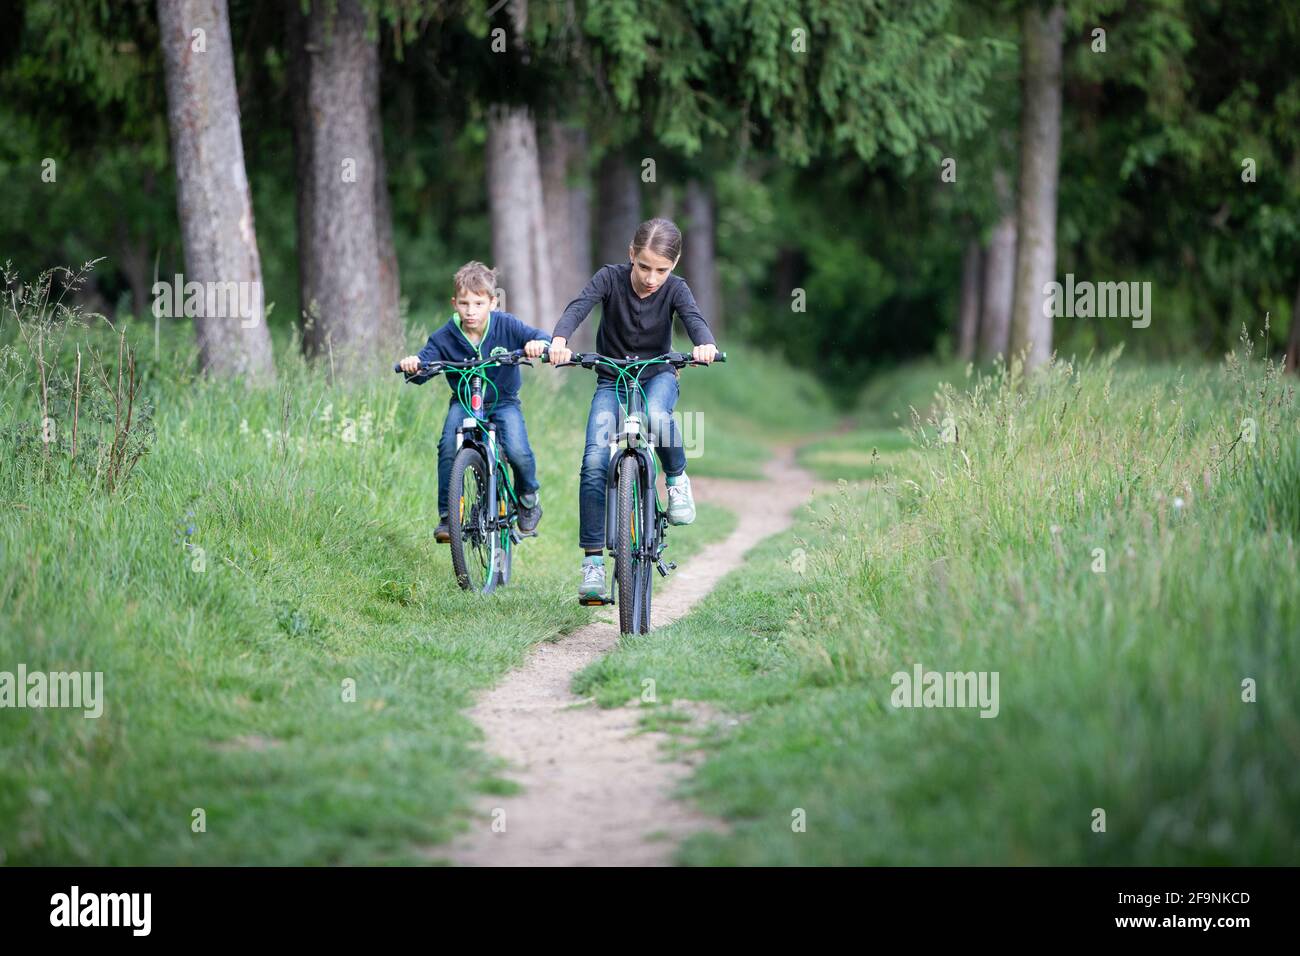 Girl and her younger brother ride bicycles in park Stock Photo